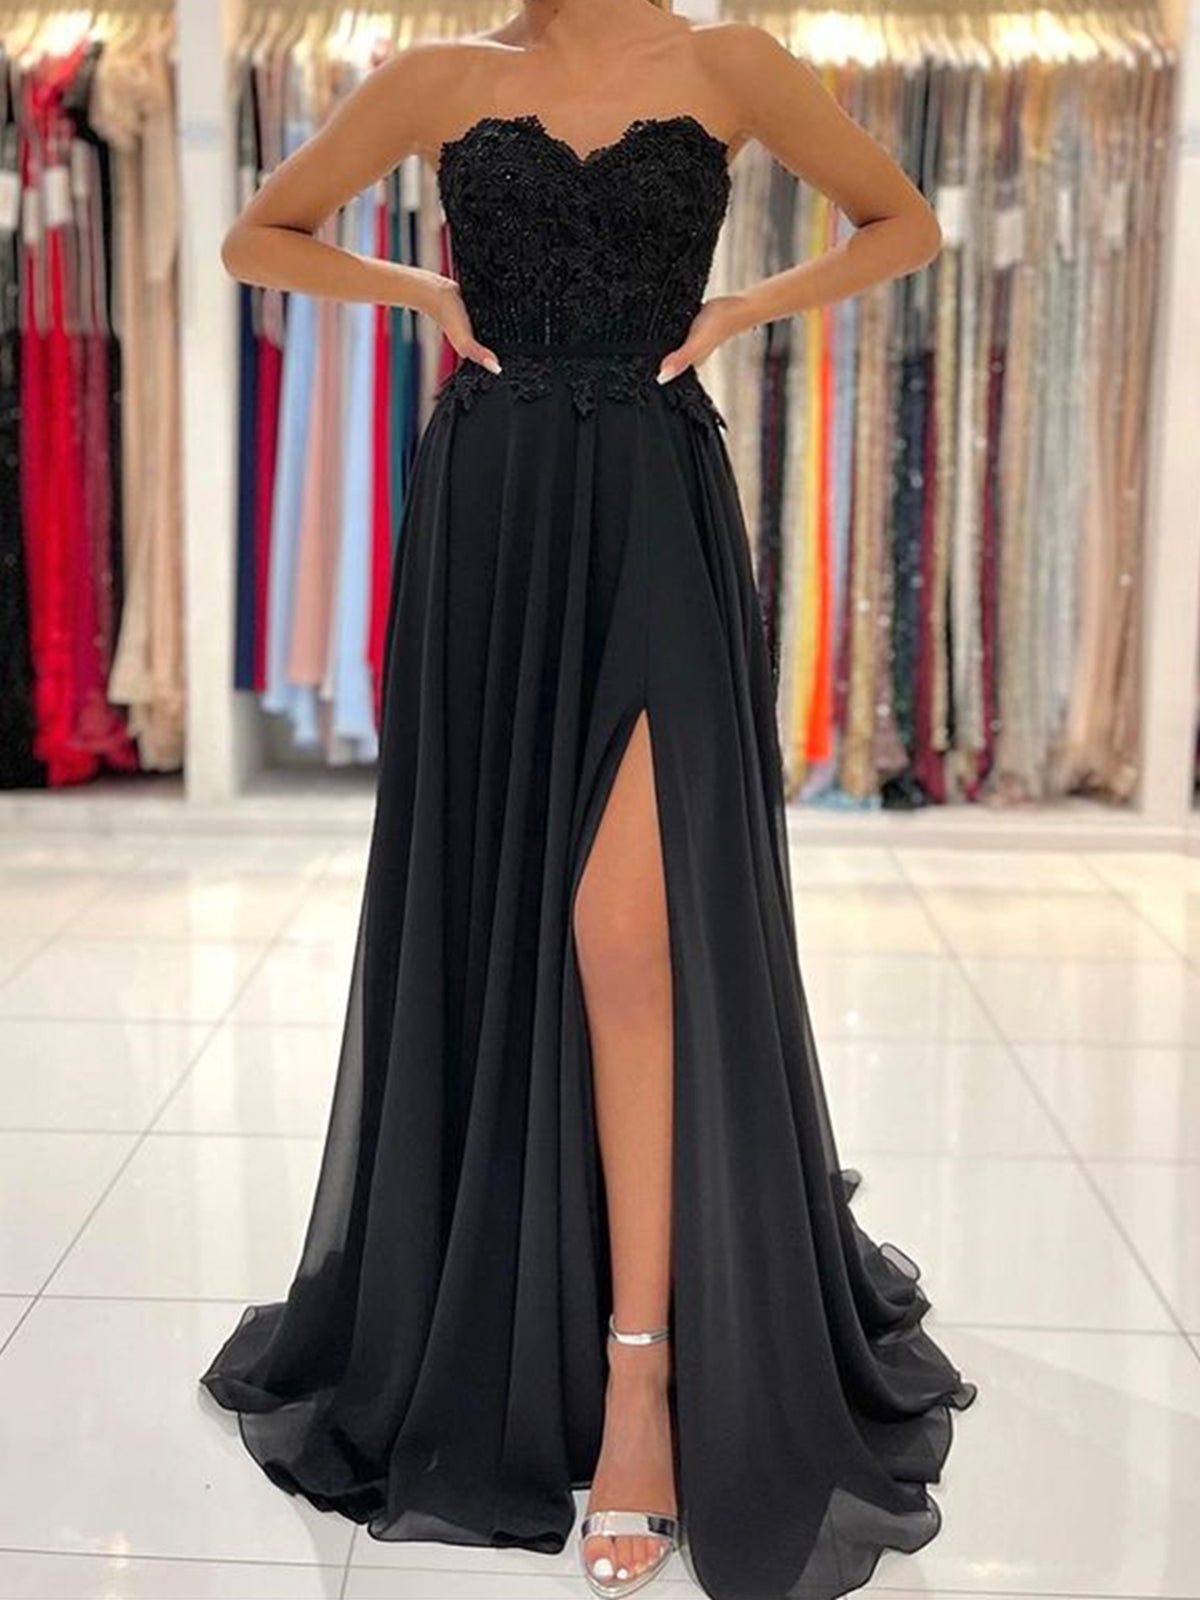 Strapless Black Lace Prom Dresses, Black Lace Formal Evening